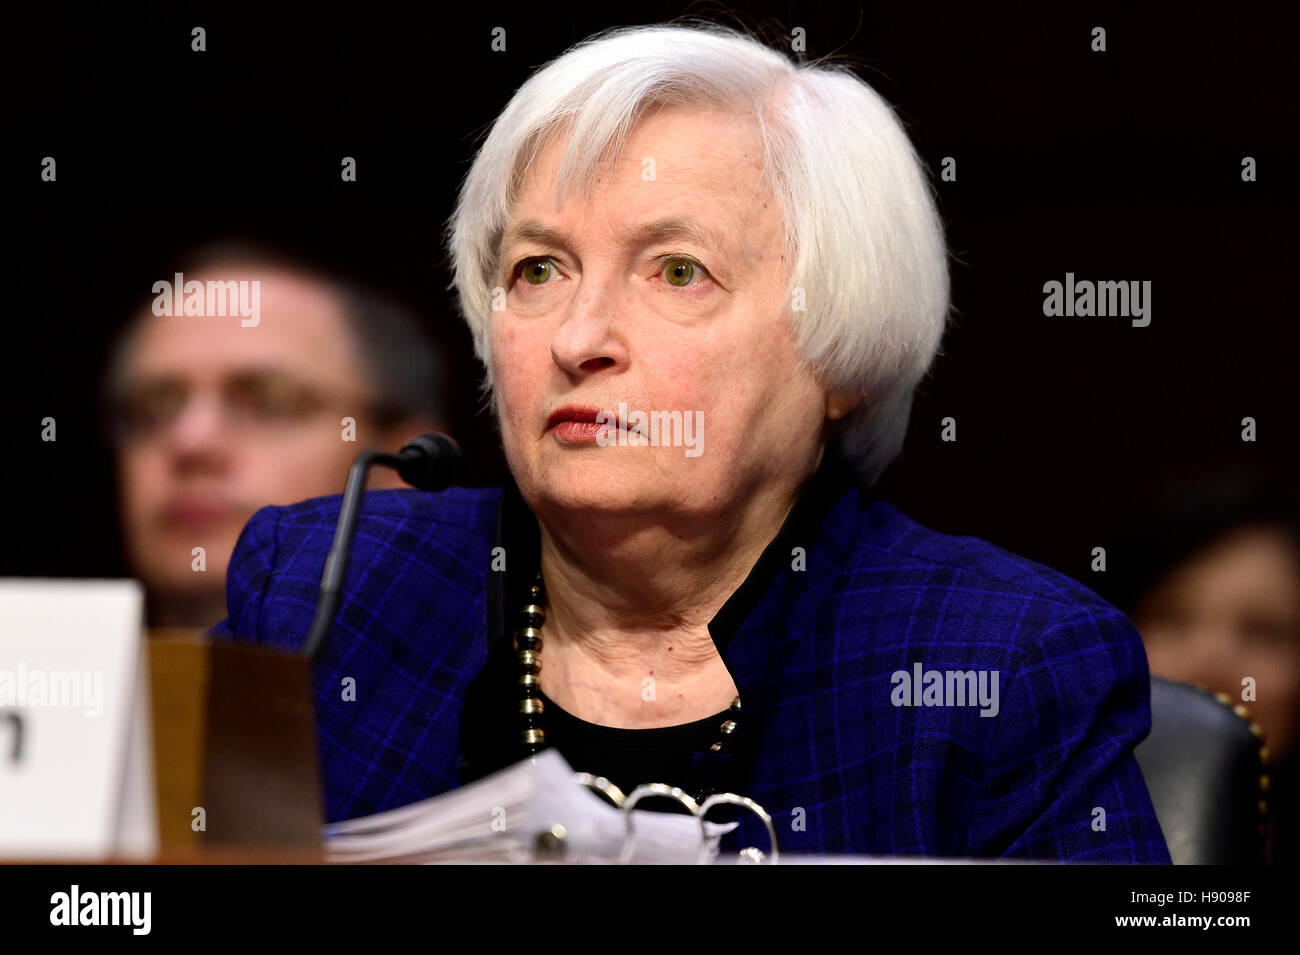 Washington DC, USA. 17th Nov, 2016. Janet L. Yellen, Chair, Board of Governors of the Federal Reserve System testifies before the United States Congress Joint Economic Committee on 'The Economic Outlook' in Washington, DC on Thursday, November 17, 2016. I Stock Photo